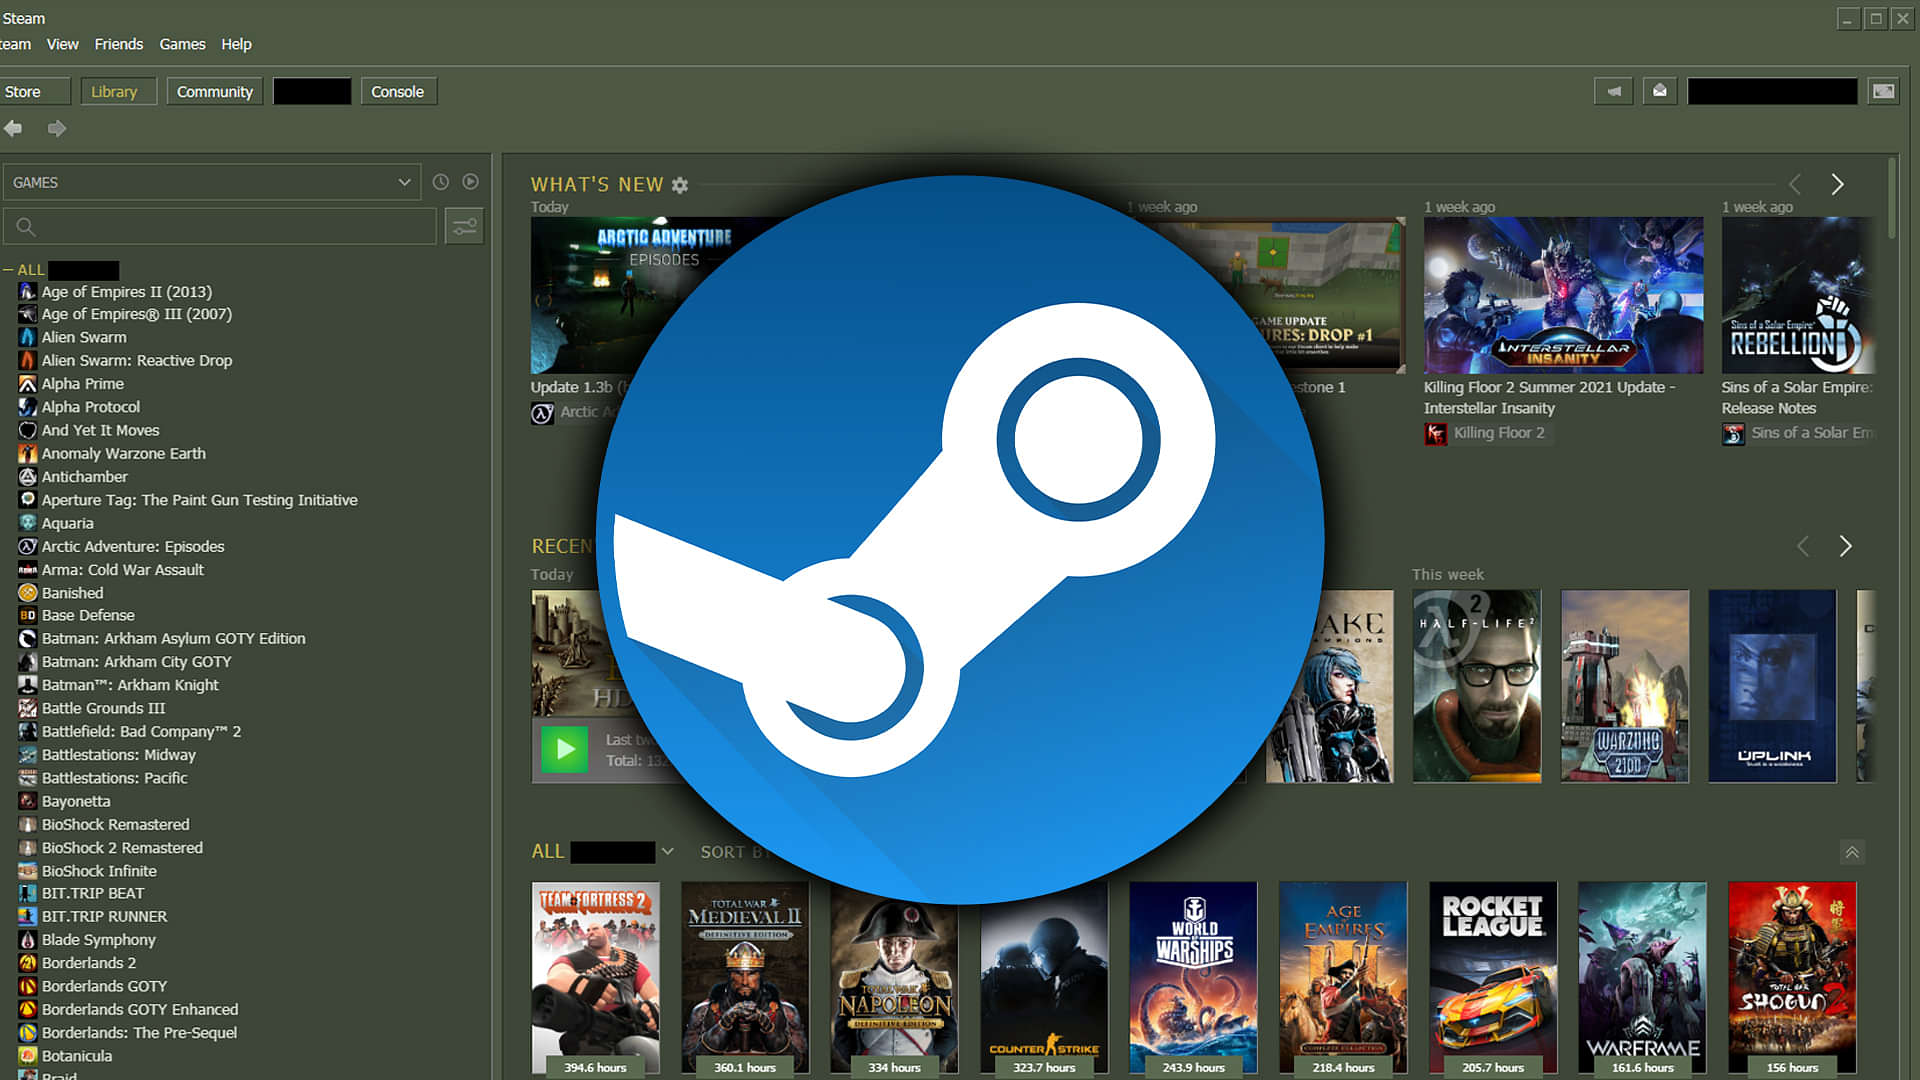 10 Of The Most Insanely Expensive Digital Items On Steam Marketplace